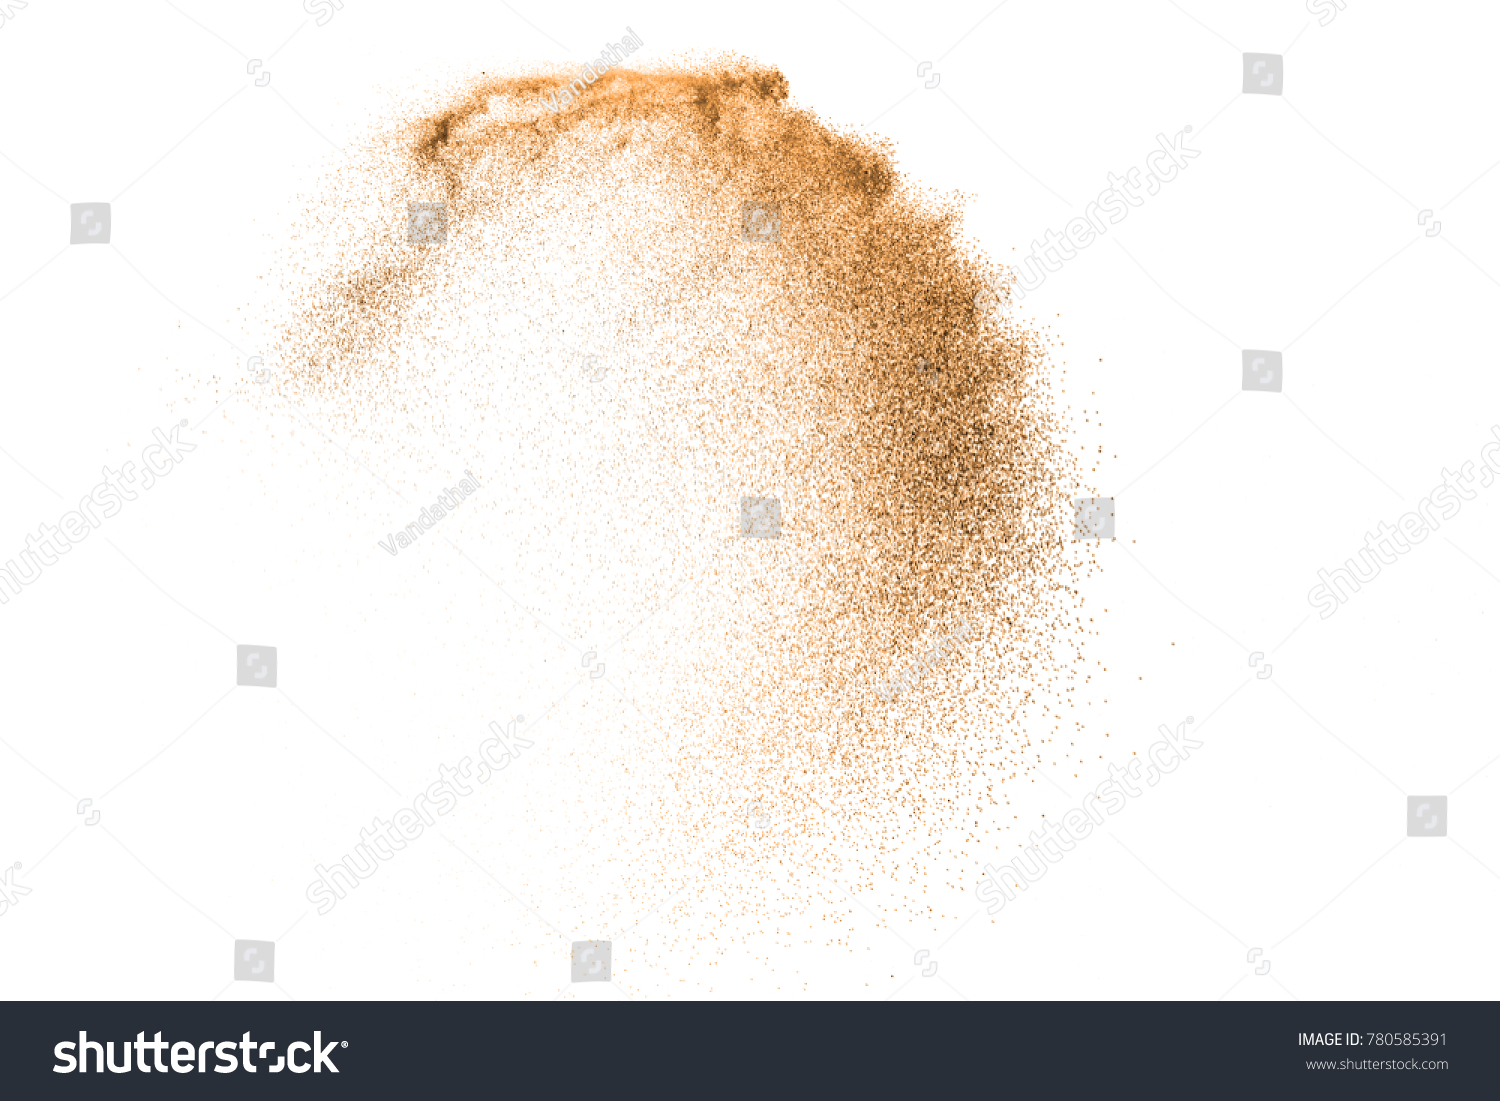 Gold sand explosion isolated on white background. Abstract sand cloud splash. Sandy fly wave in the air. #780585391